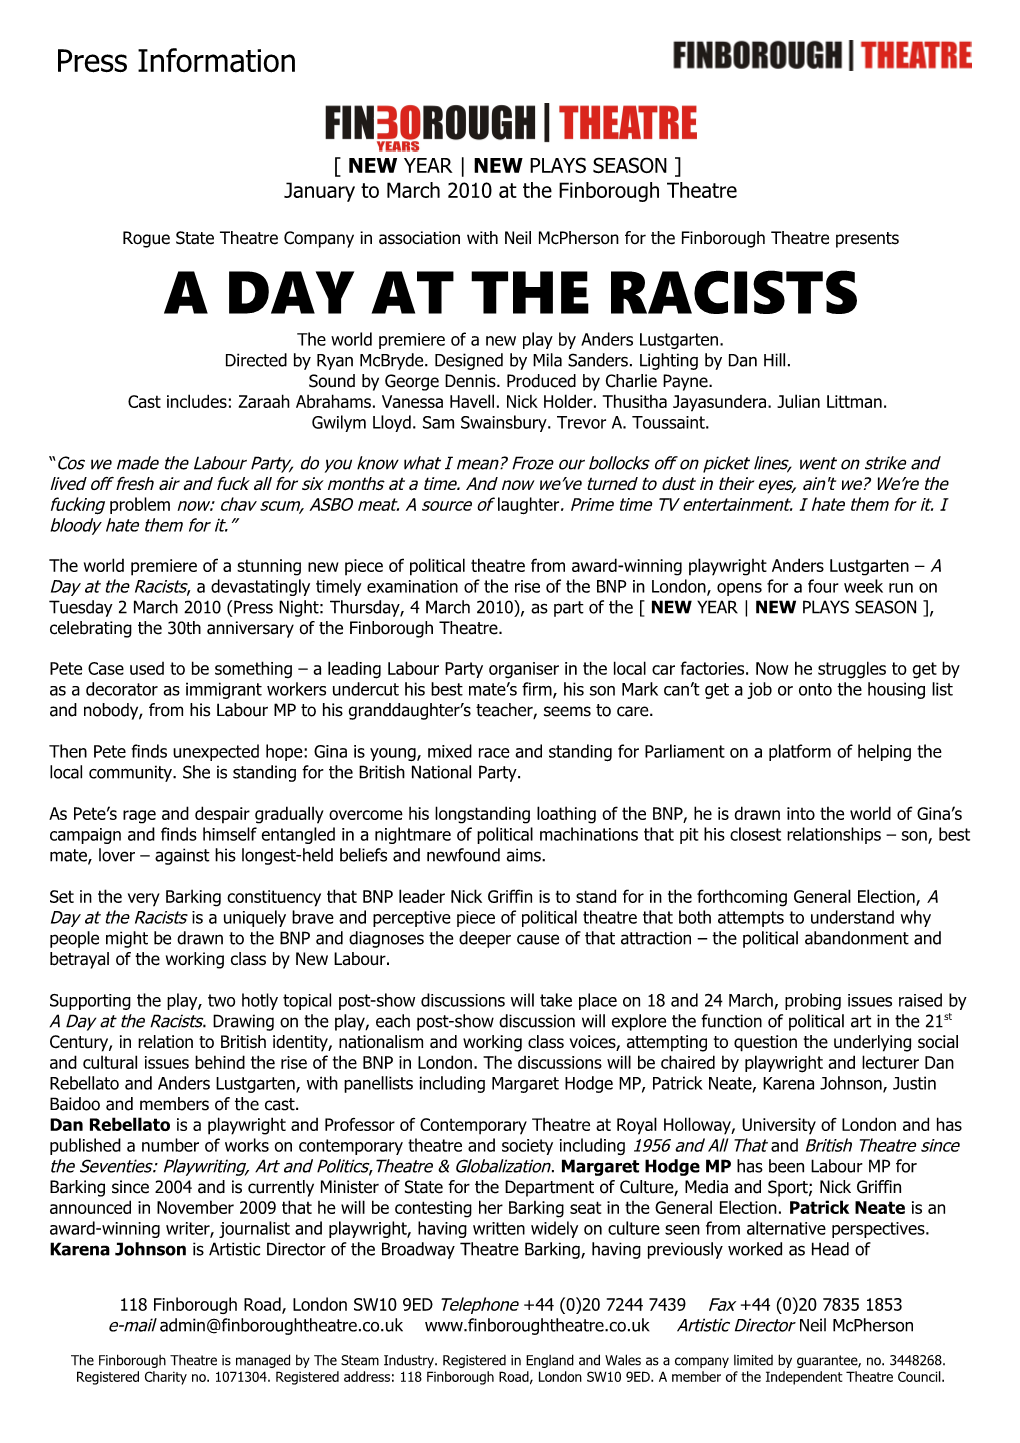 Press a Day at the Racists